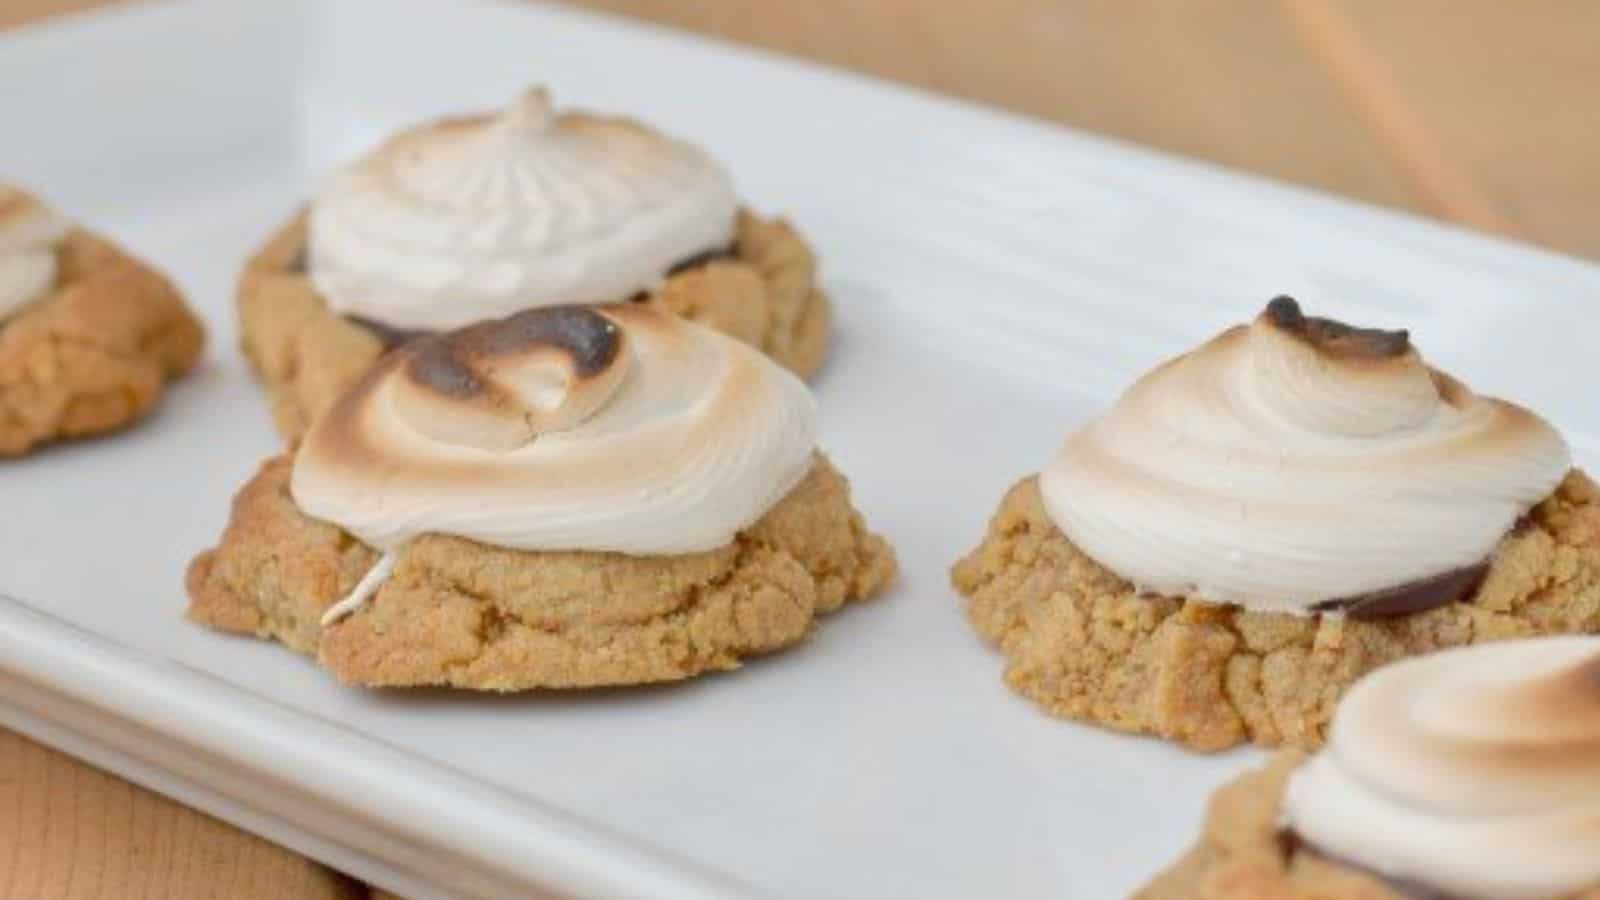 Image shows Toasted smores cookies on a white tray.